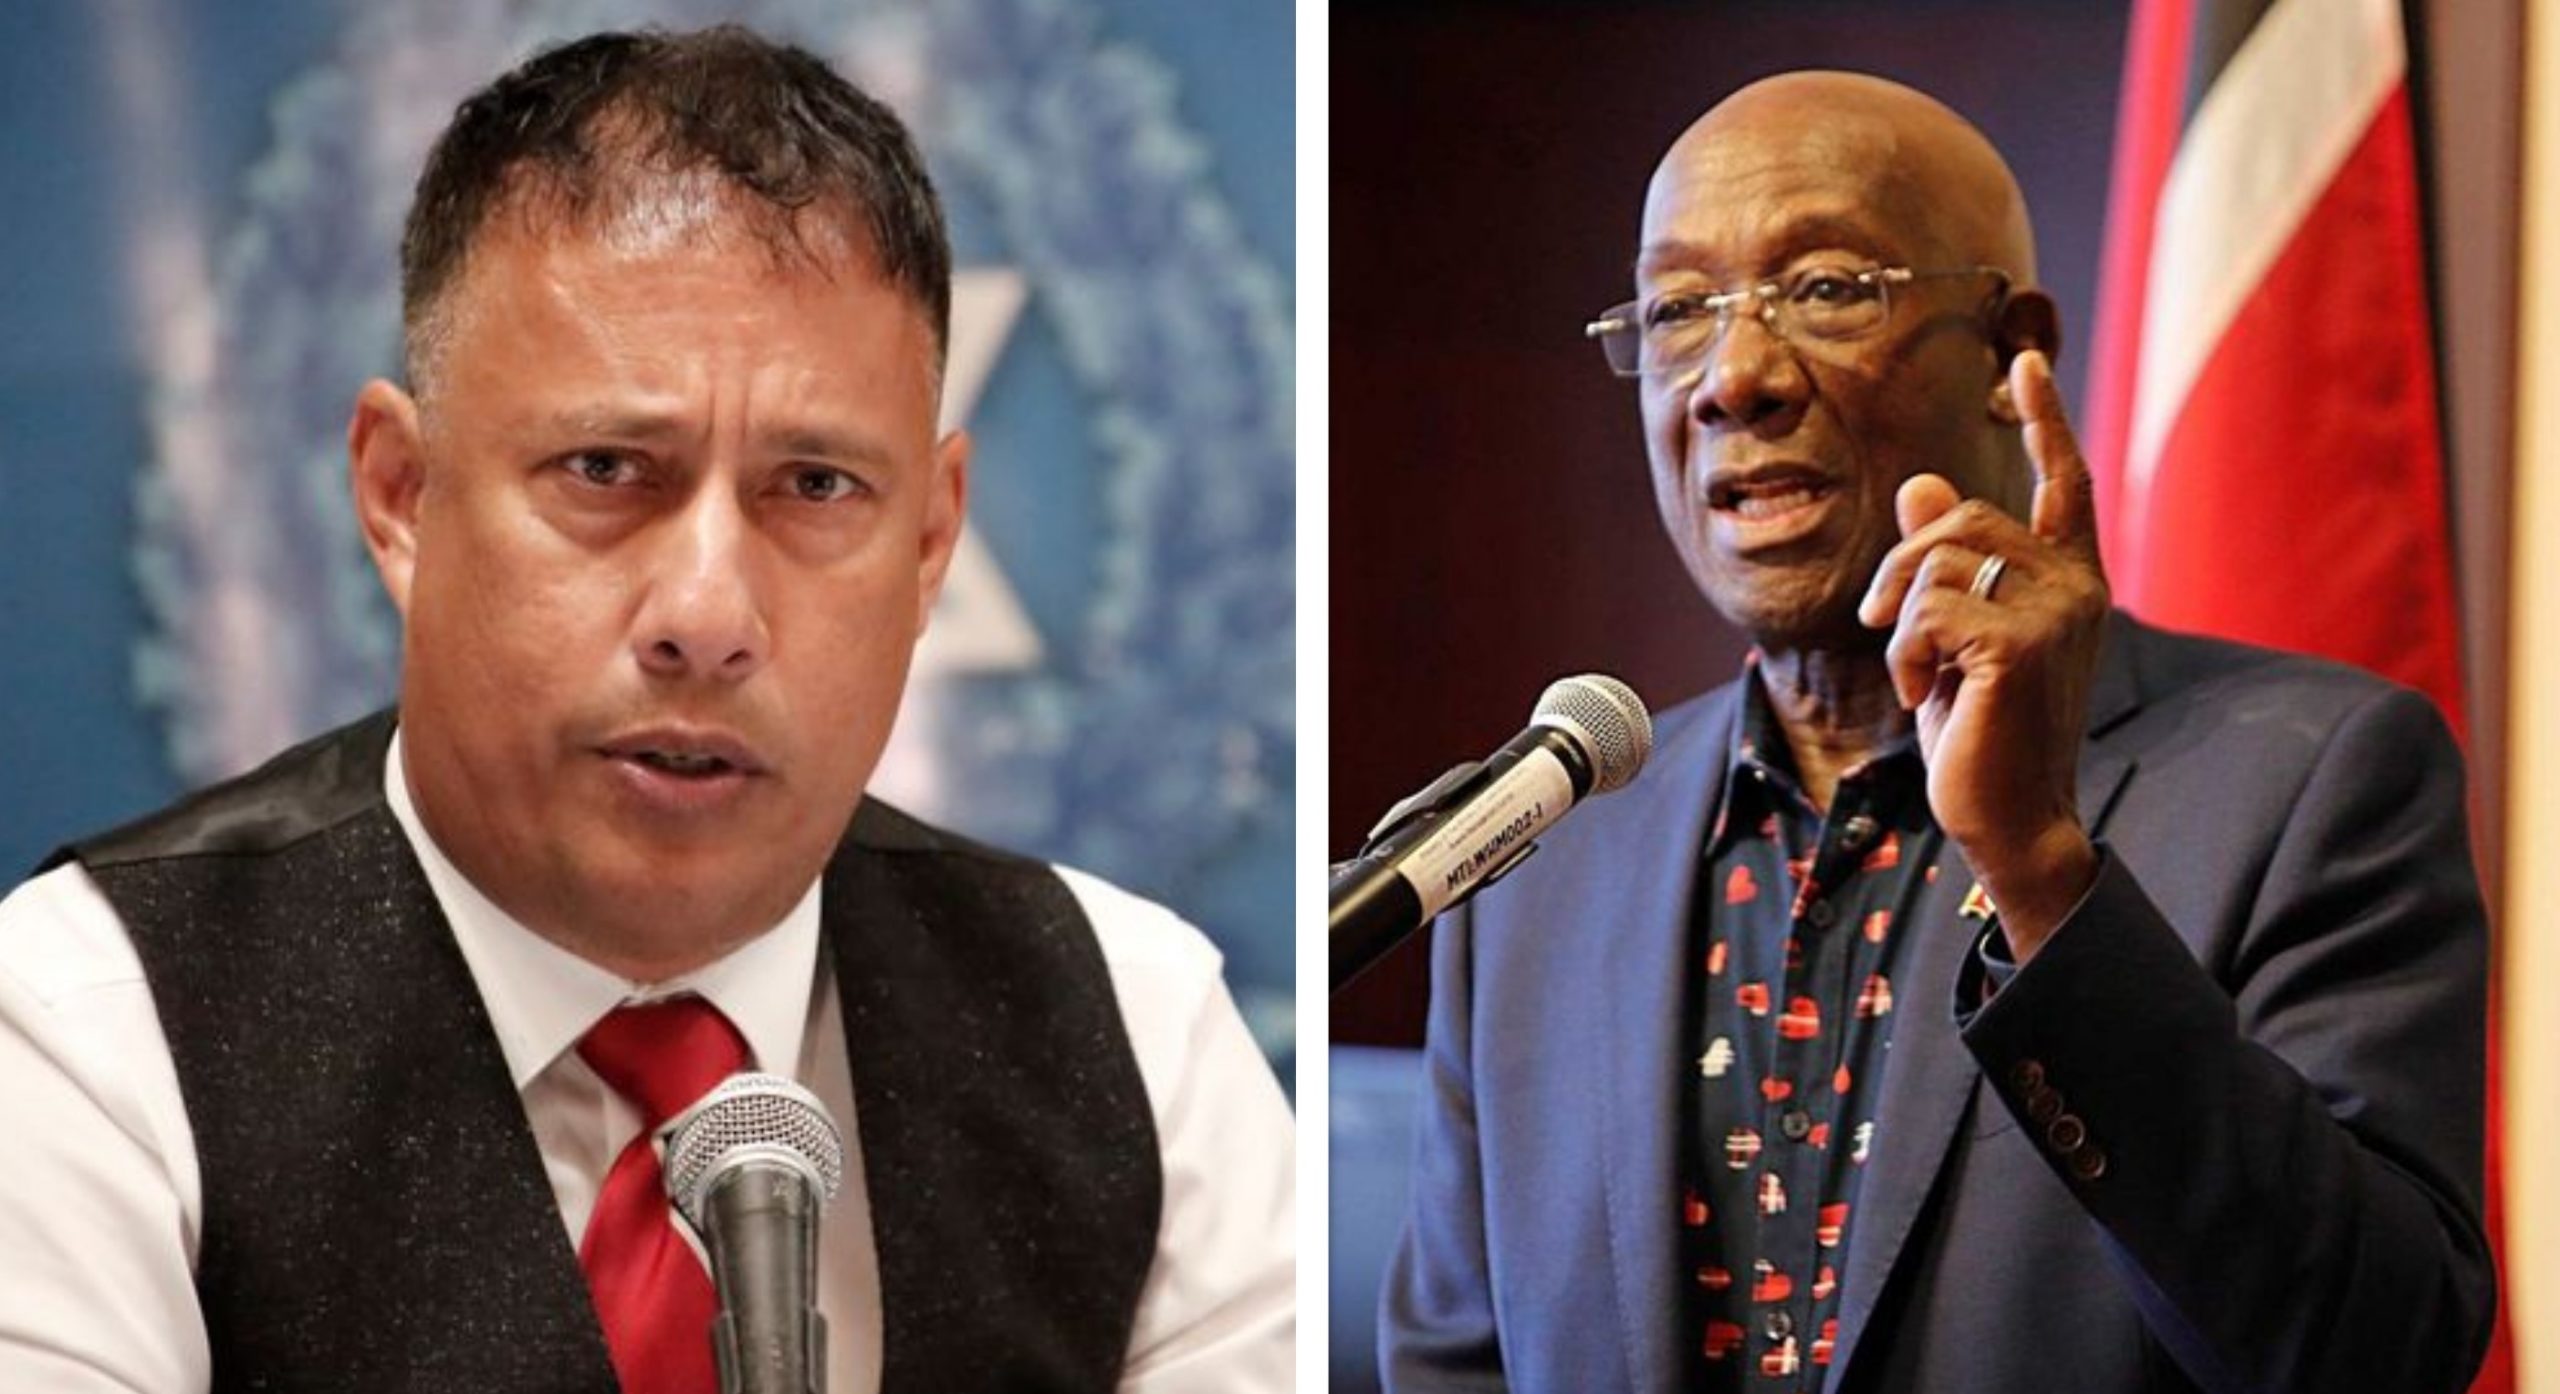 Griffith tells Rowley call election now after Integrity Commission launches new probe into PM